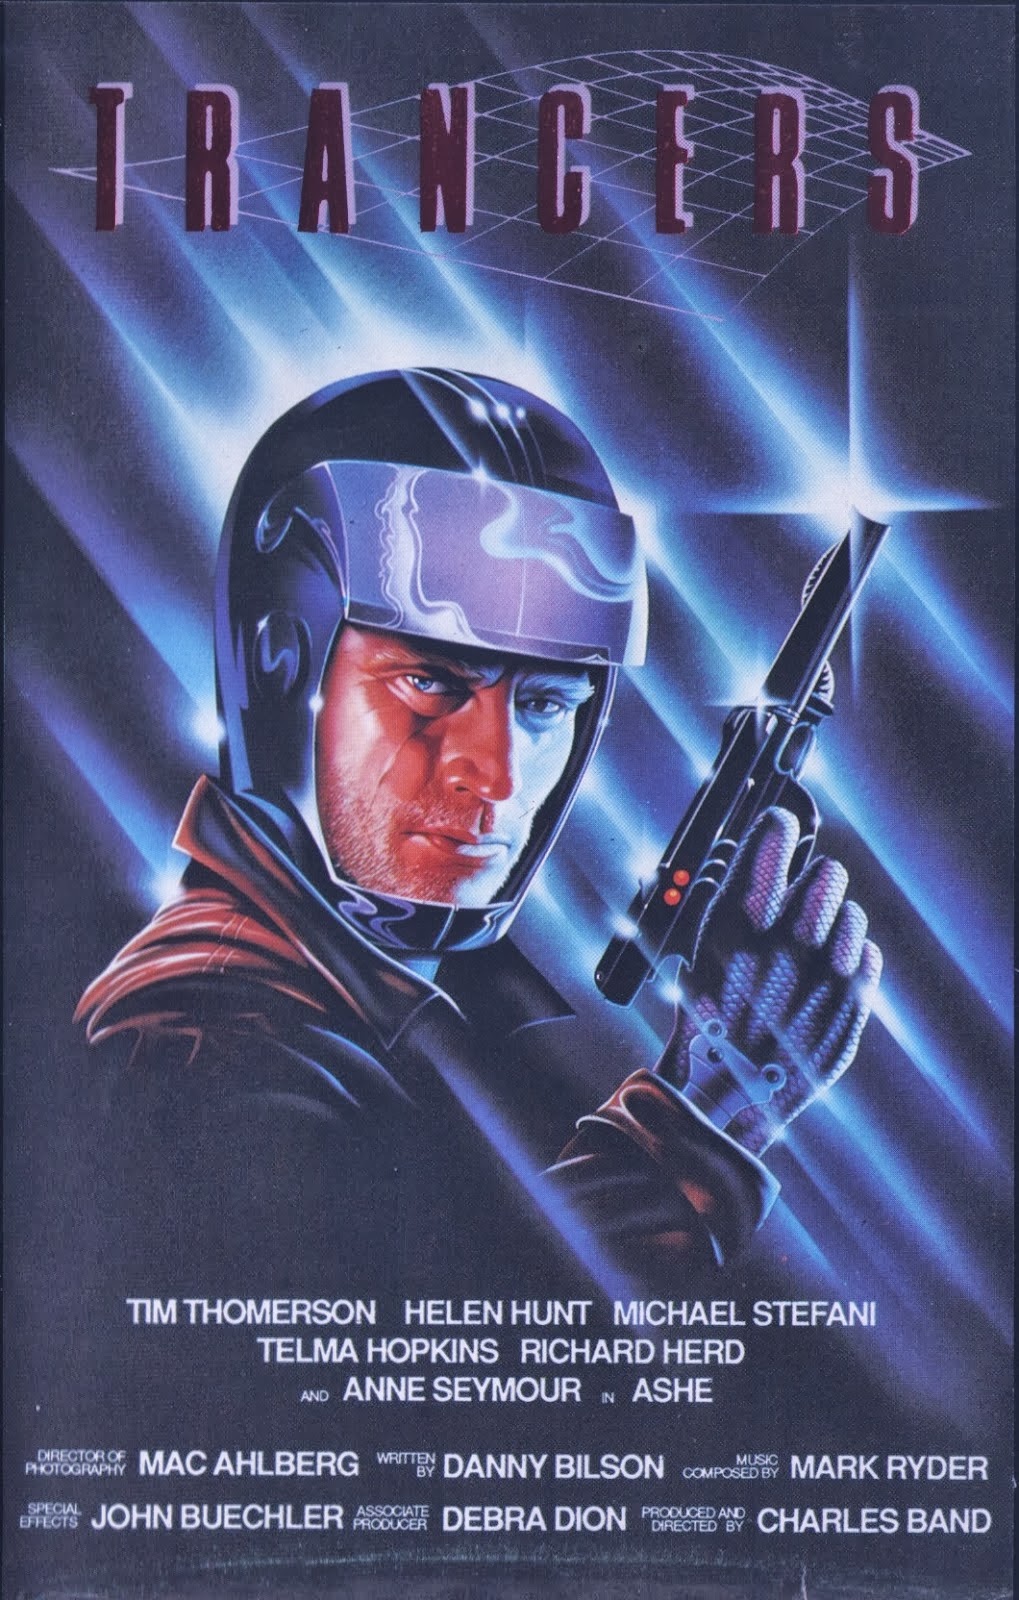 Jack Deth, possibly the greatest film character name of all time!!